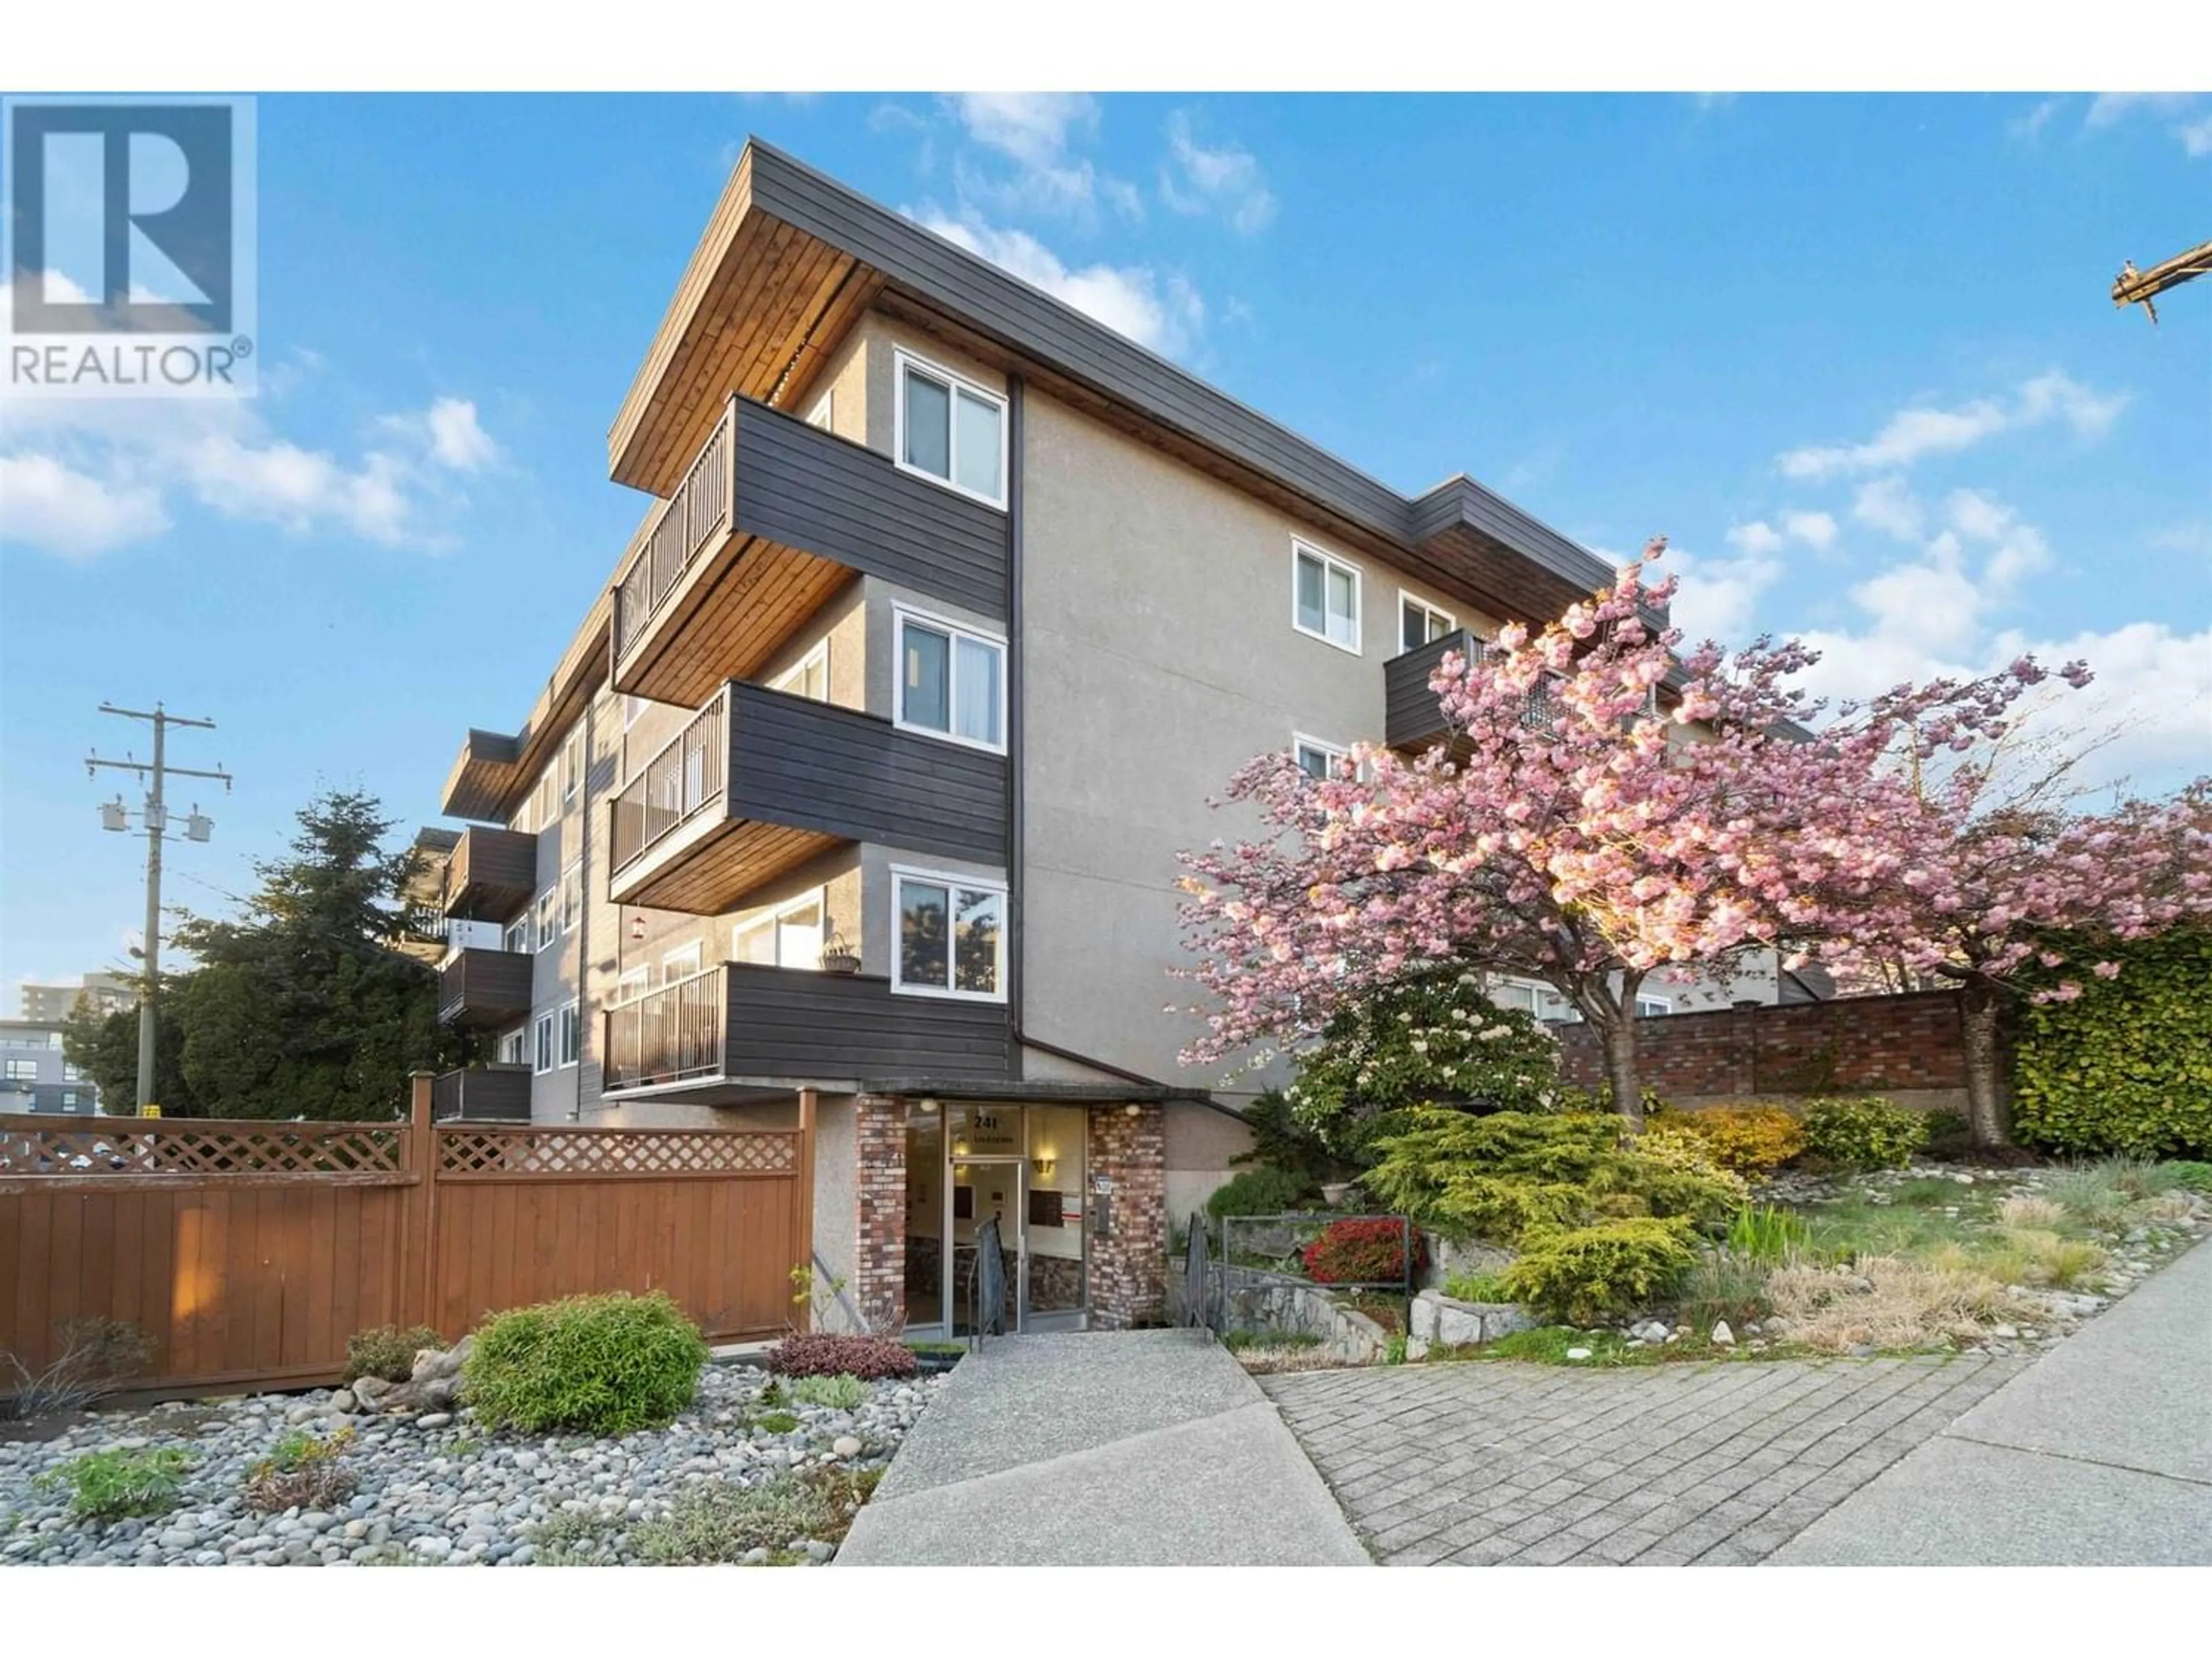 A pic from exterior of the house or condo for 104 241 ST. ANDREWS AVENUE, North Vancouver British Columbia V7L3K8